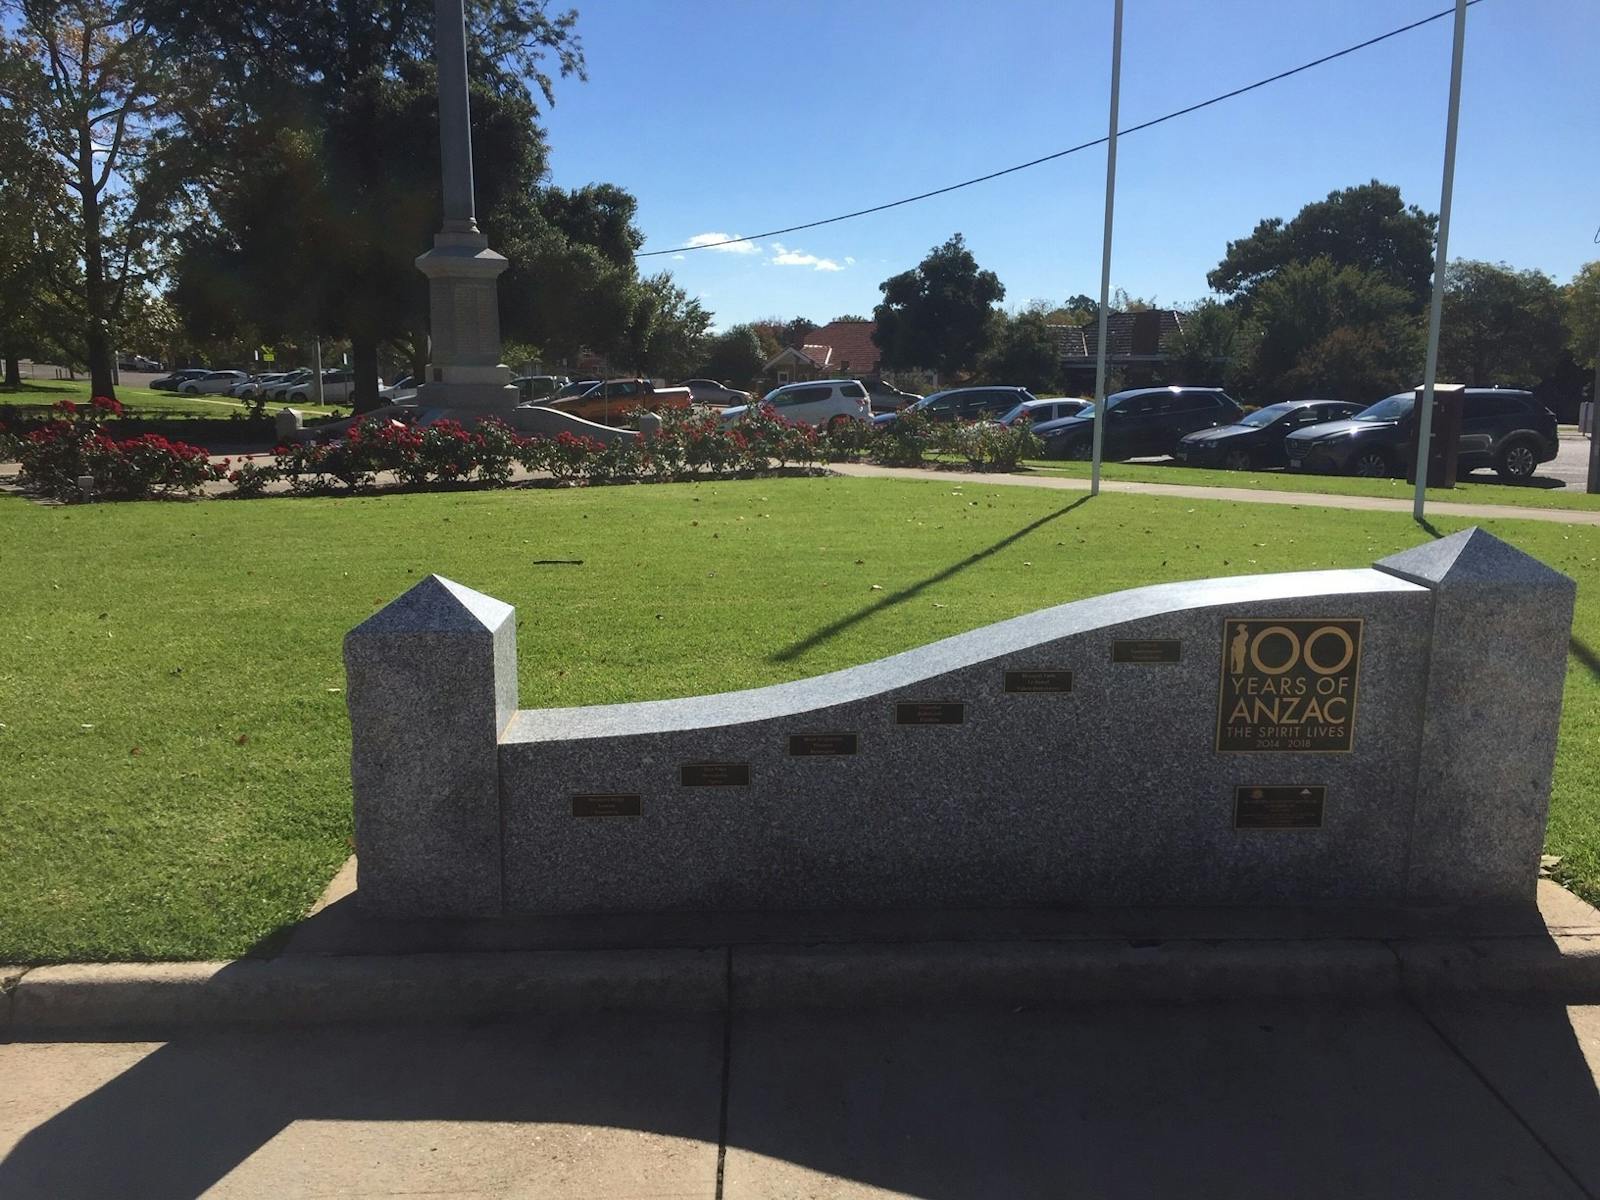 !00 years of ANZAC's sculpture, Memorial Garden roses, cenotaph, sunny sky, trees, parked cars.